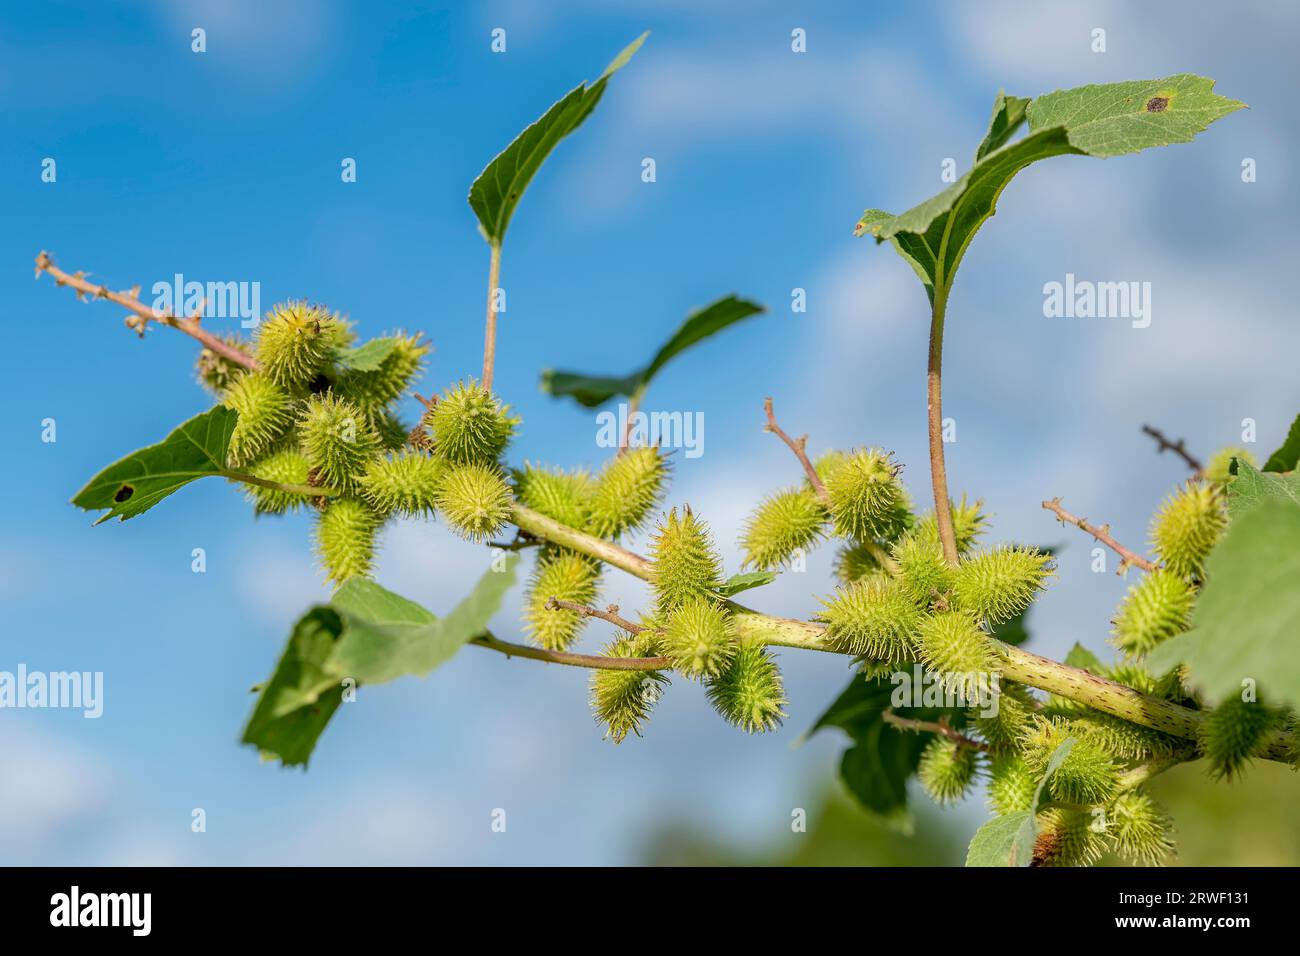 A detail of a Xanthium plant also known as common cocklebur during the summer season Stock Photo